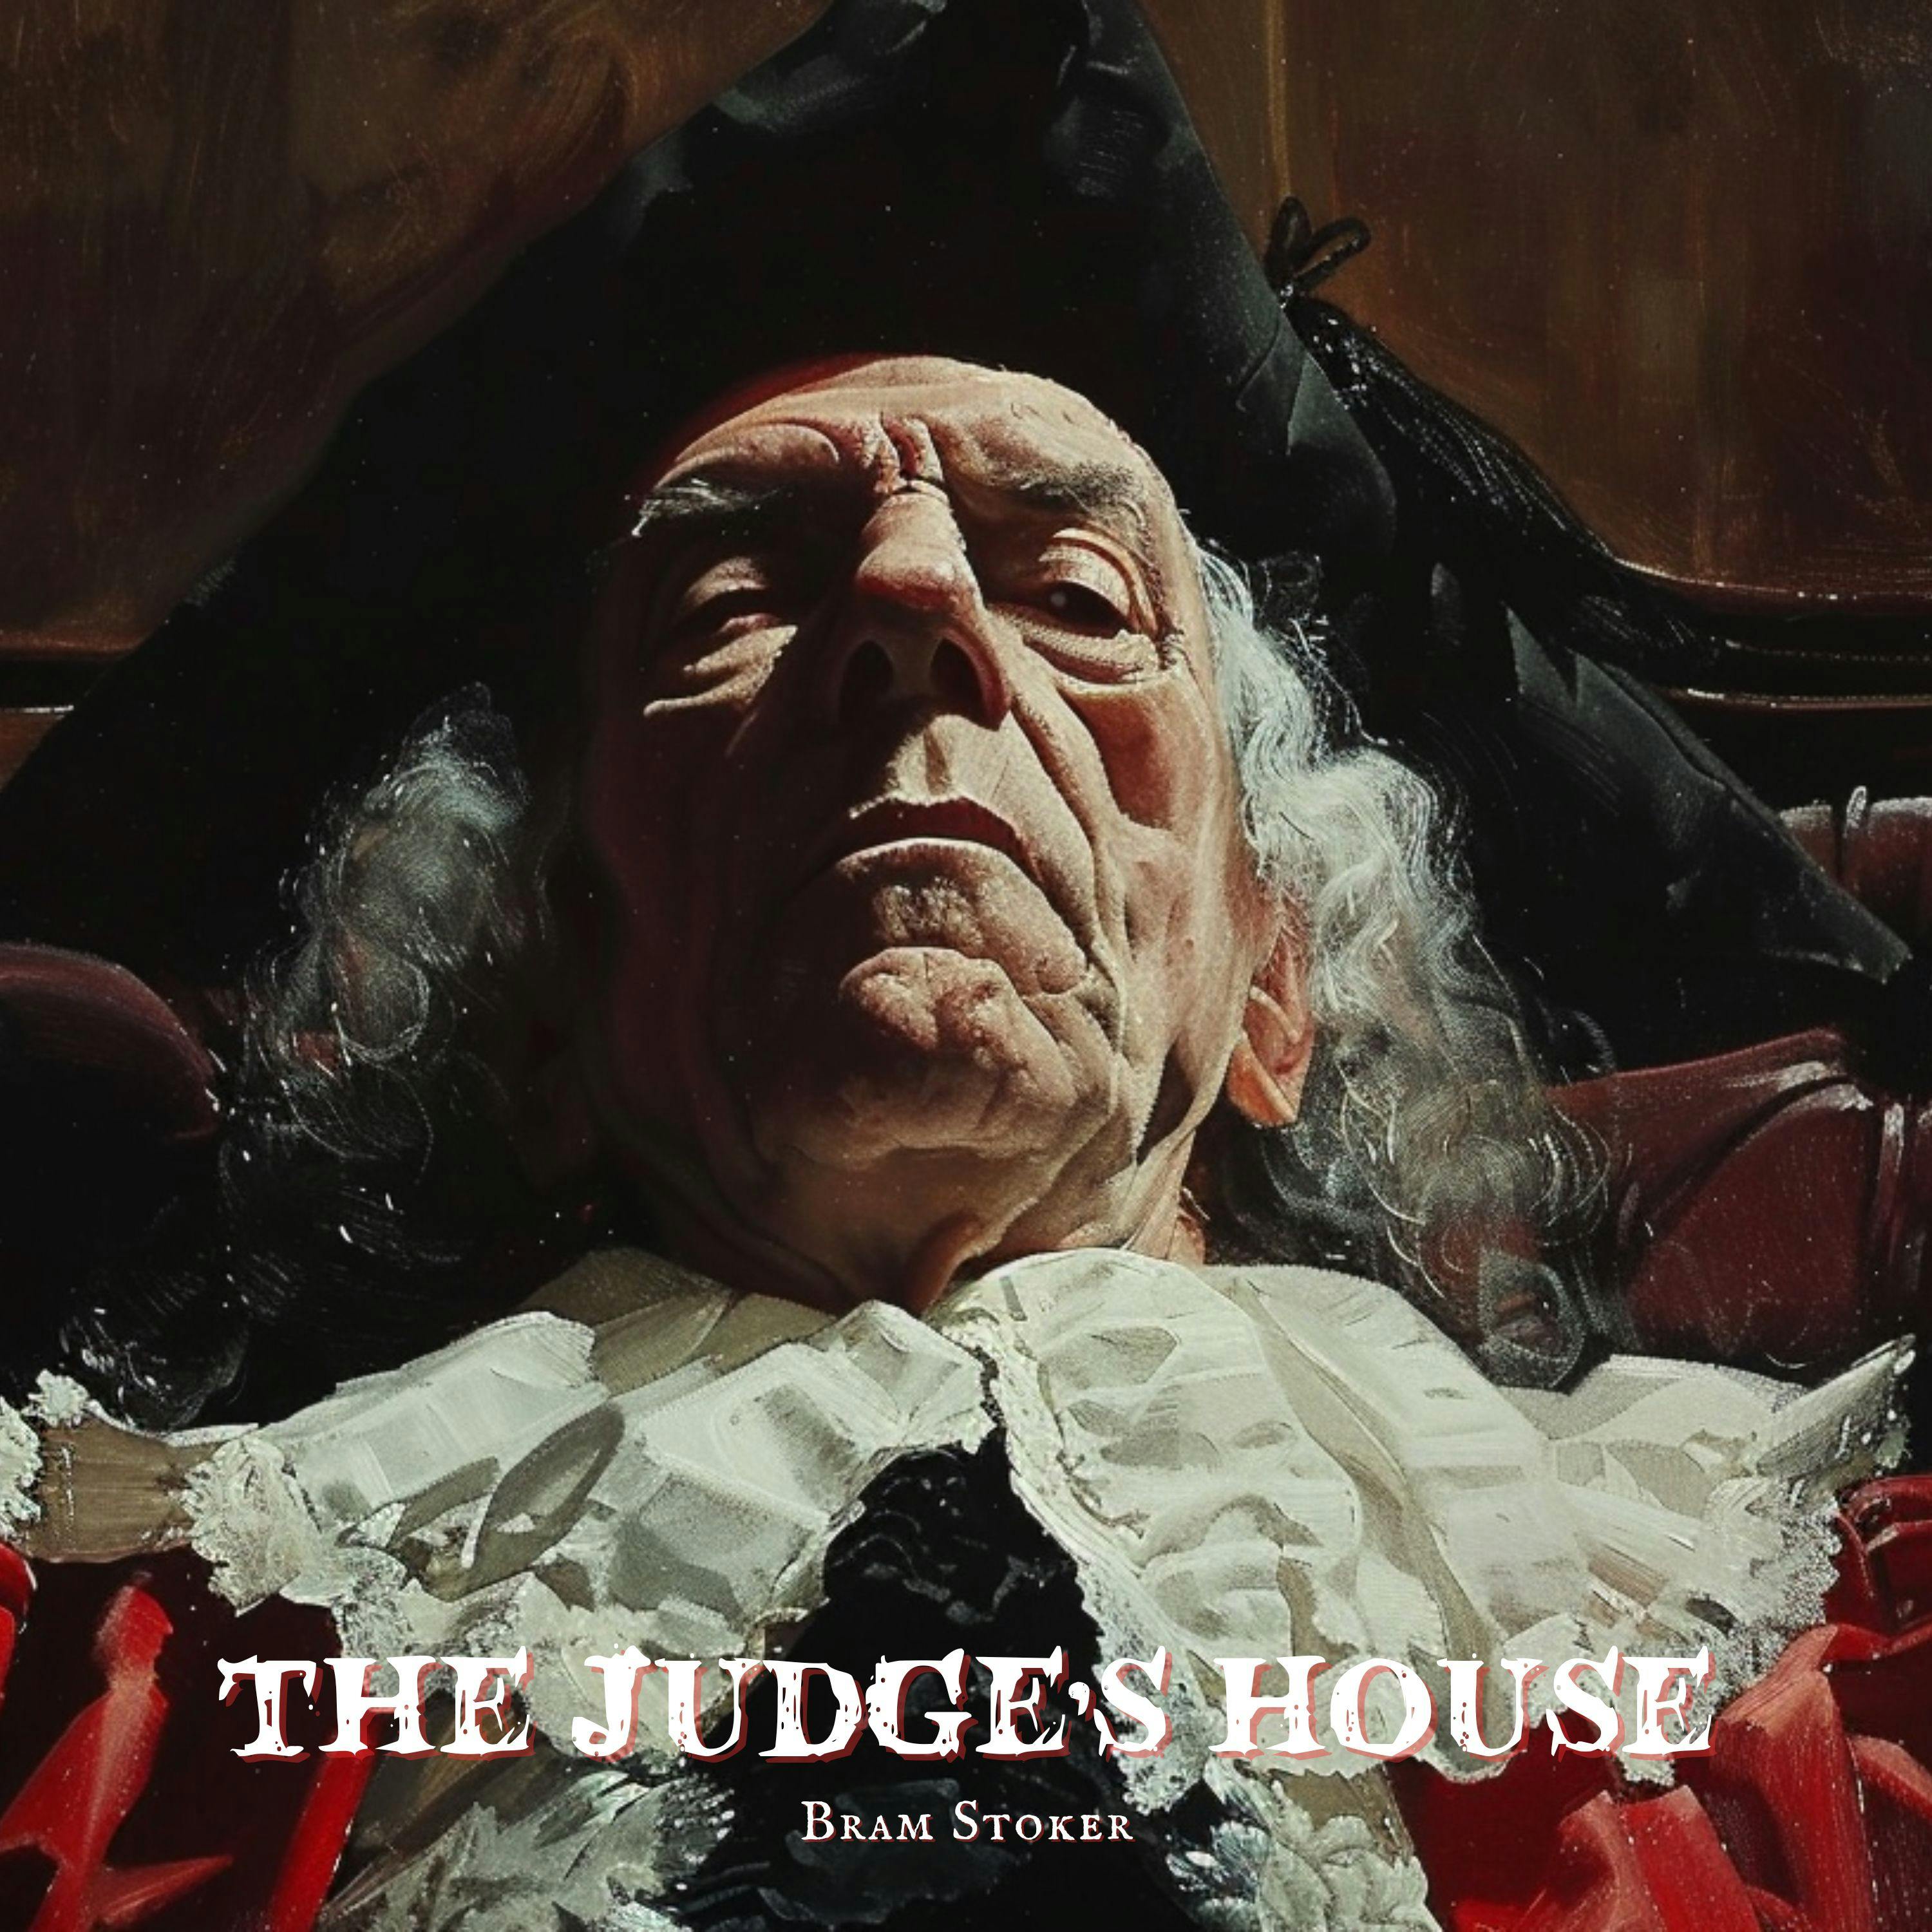 The Judge’s House by Bram Stoker